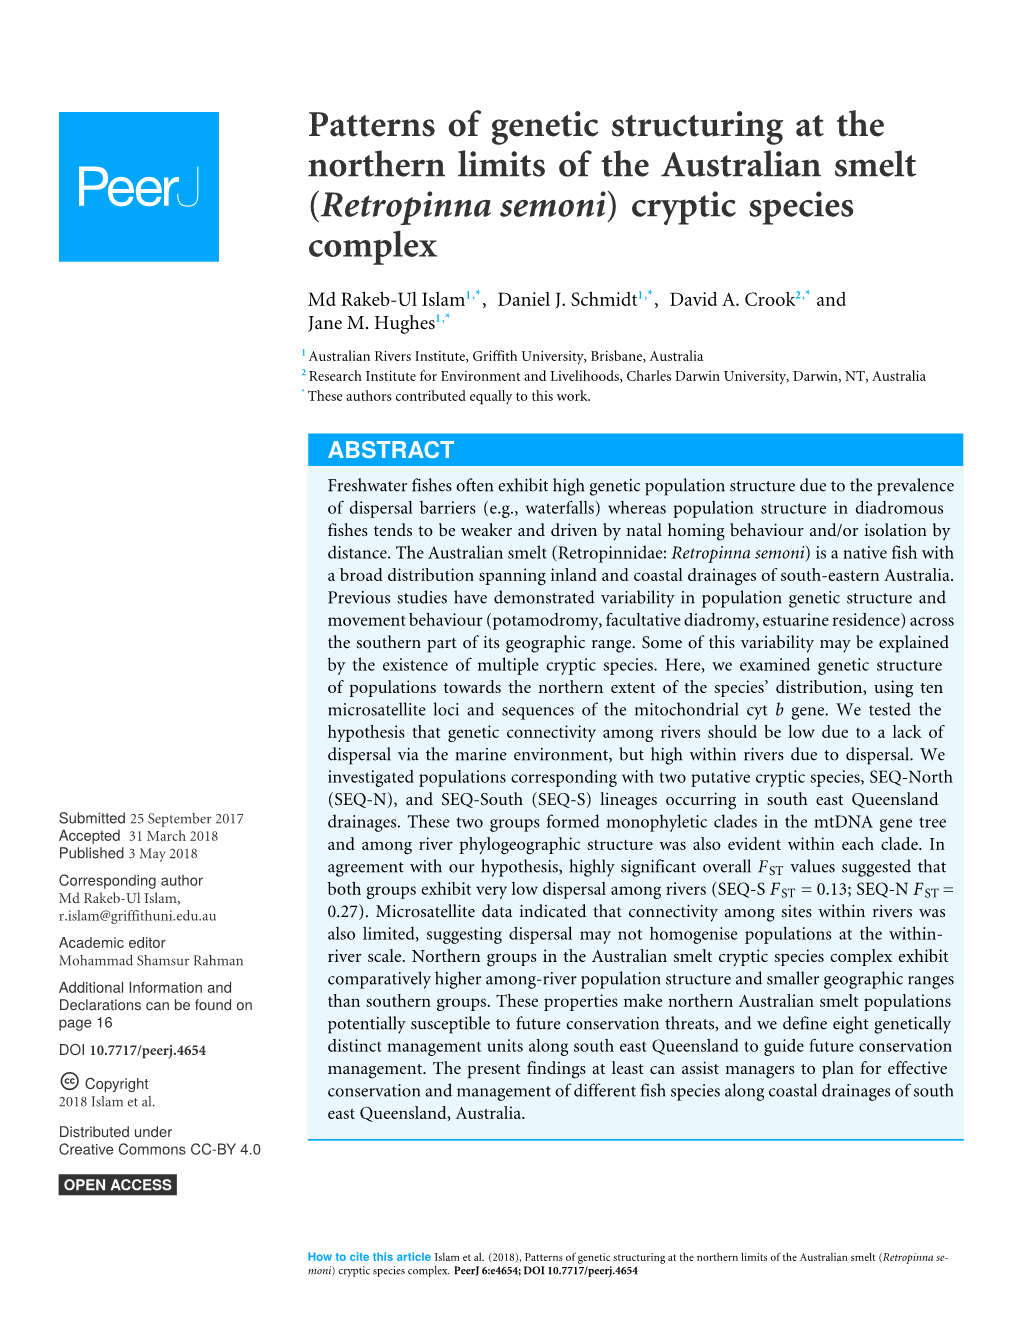 Patterns of Genetic Structuring at the Northern Limits of the Australian Smelt (Retropinna Semoni) Cryptic Species Complex